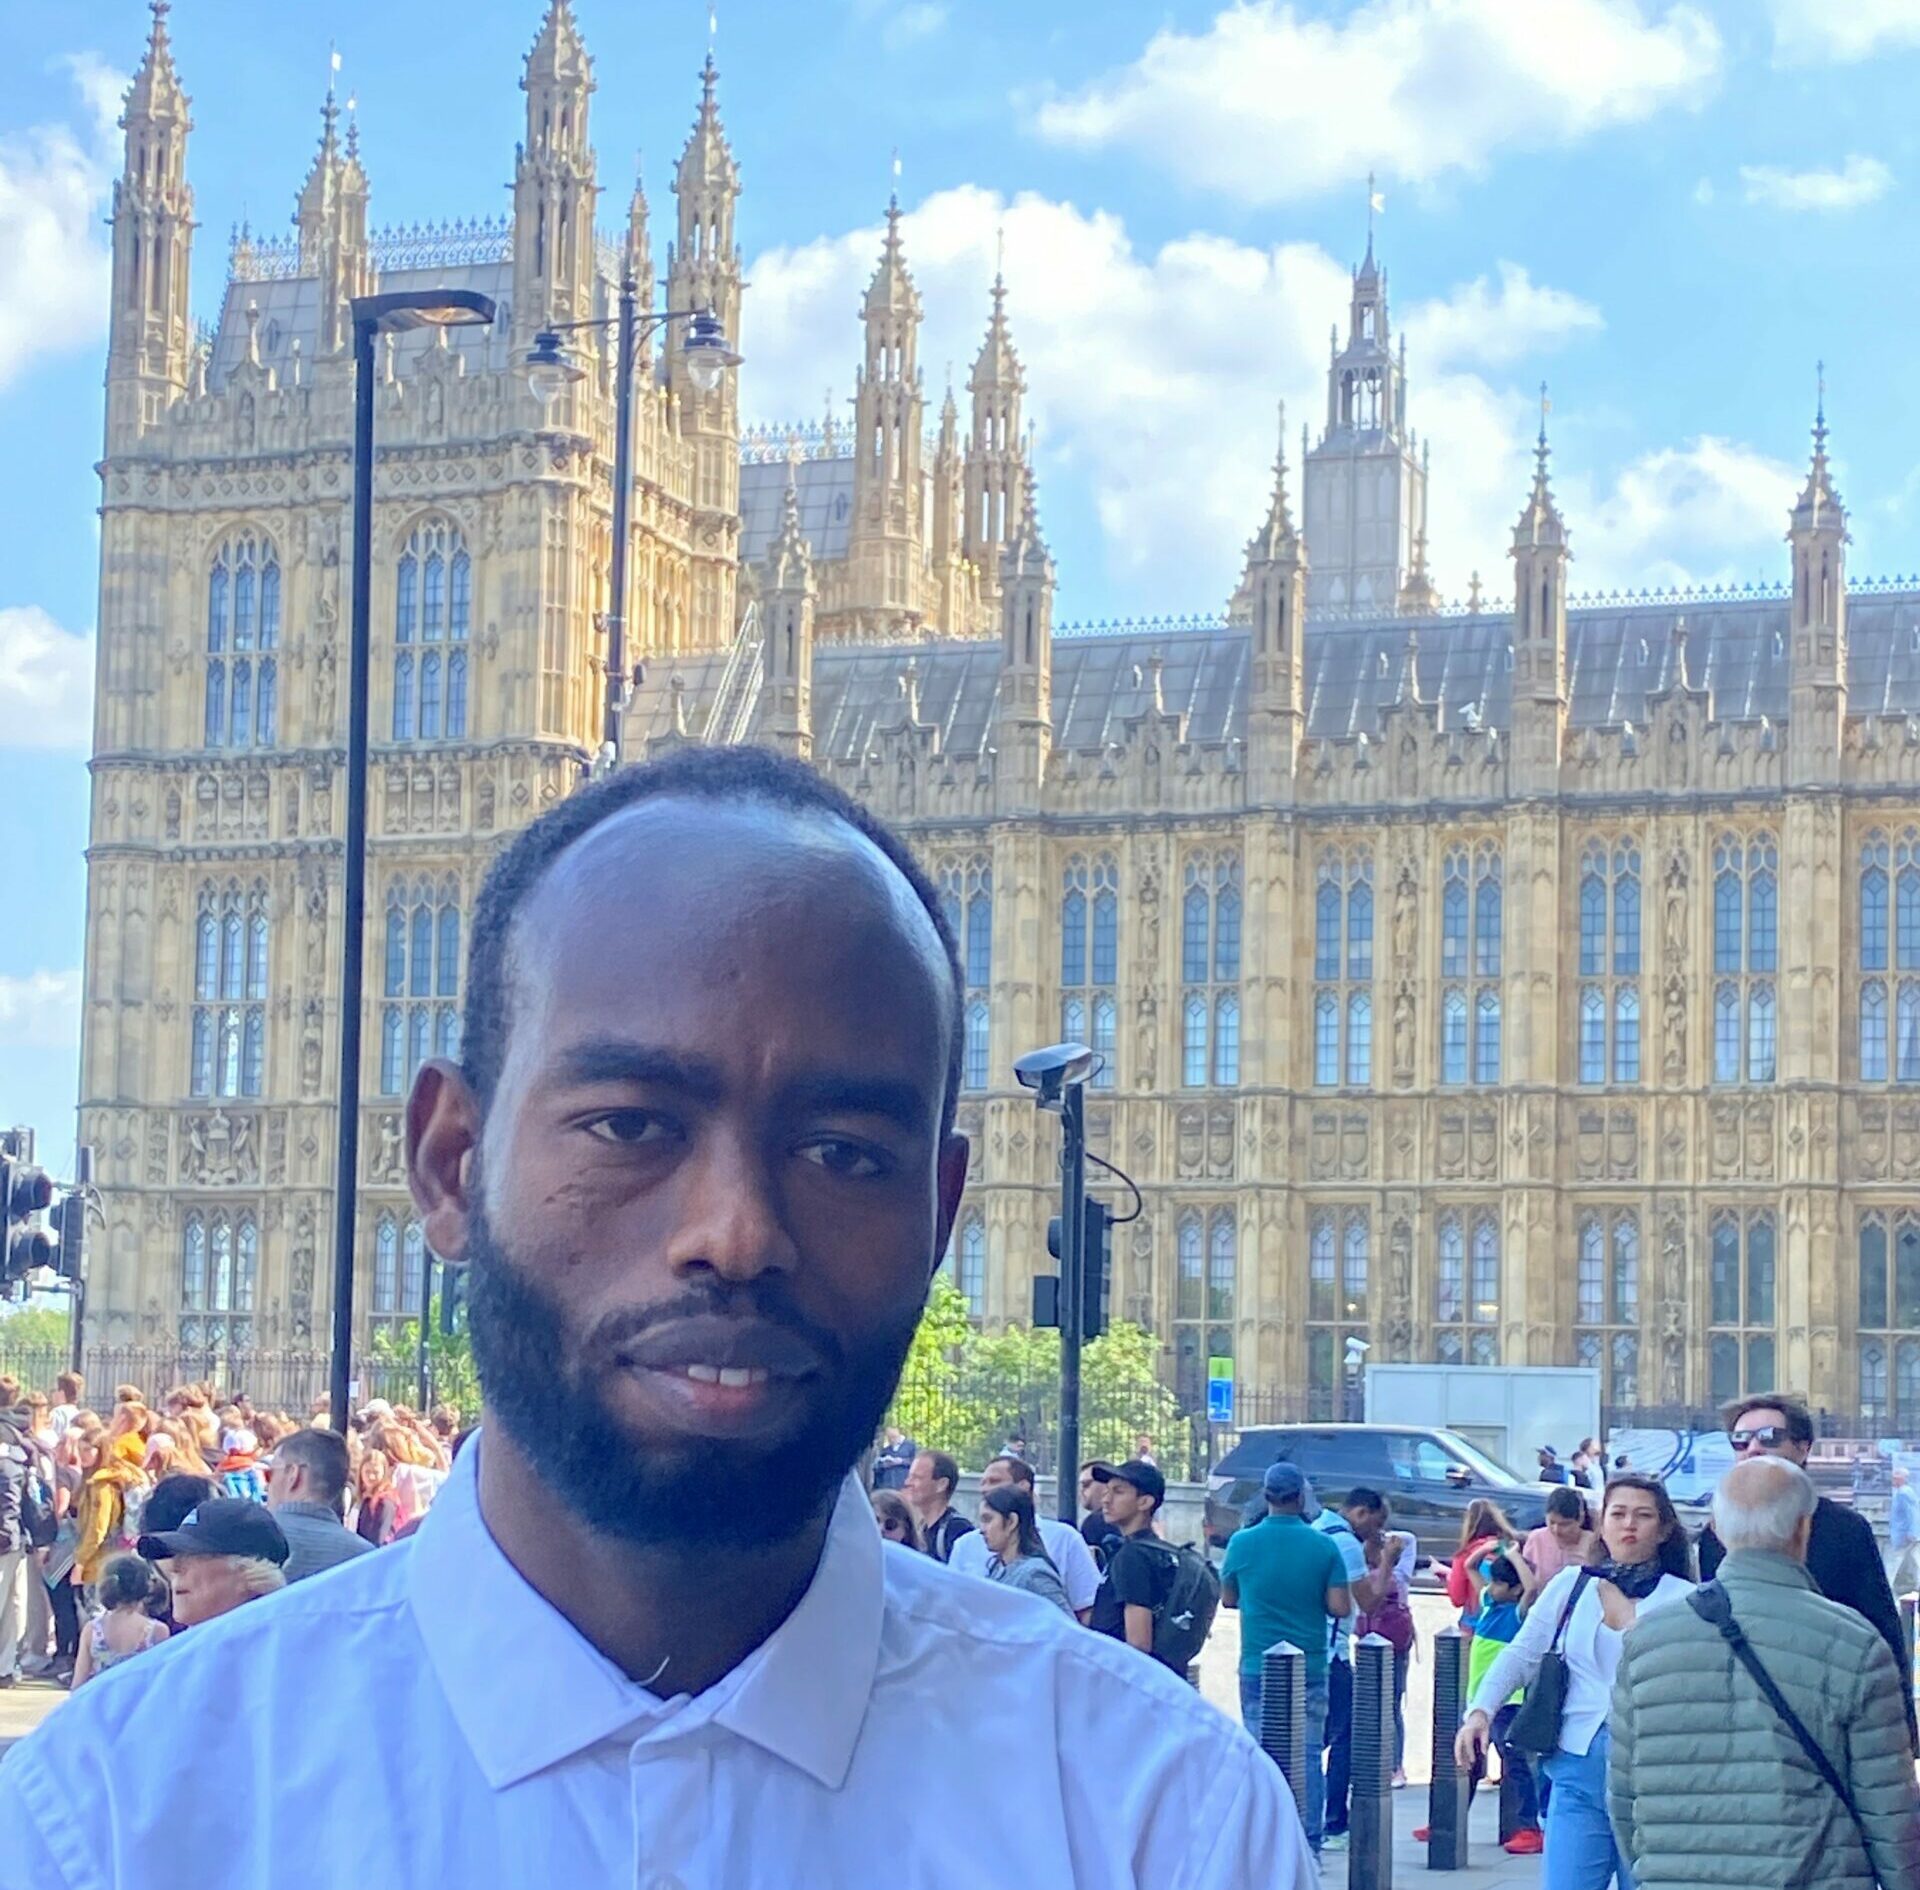 Mohanad is from Sudan and wants safer ways to claim asylum.